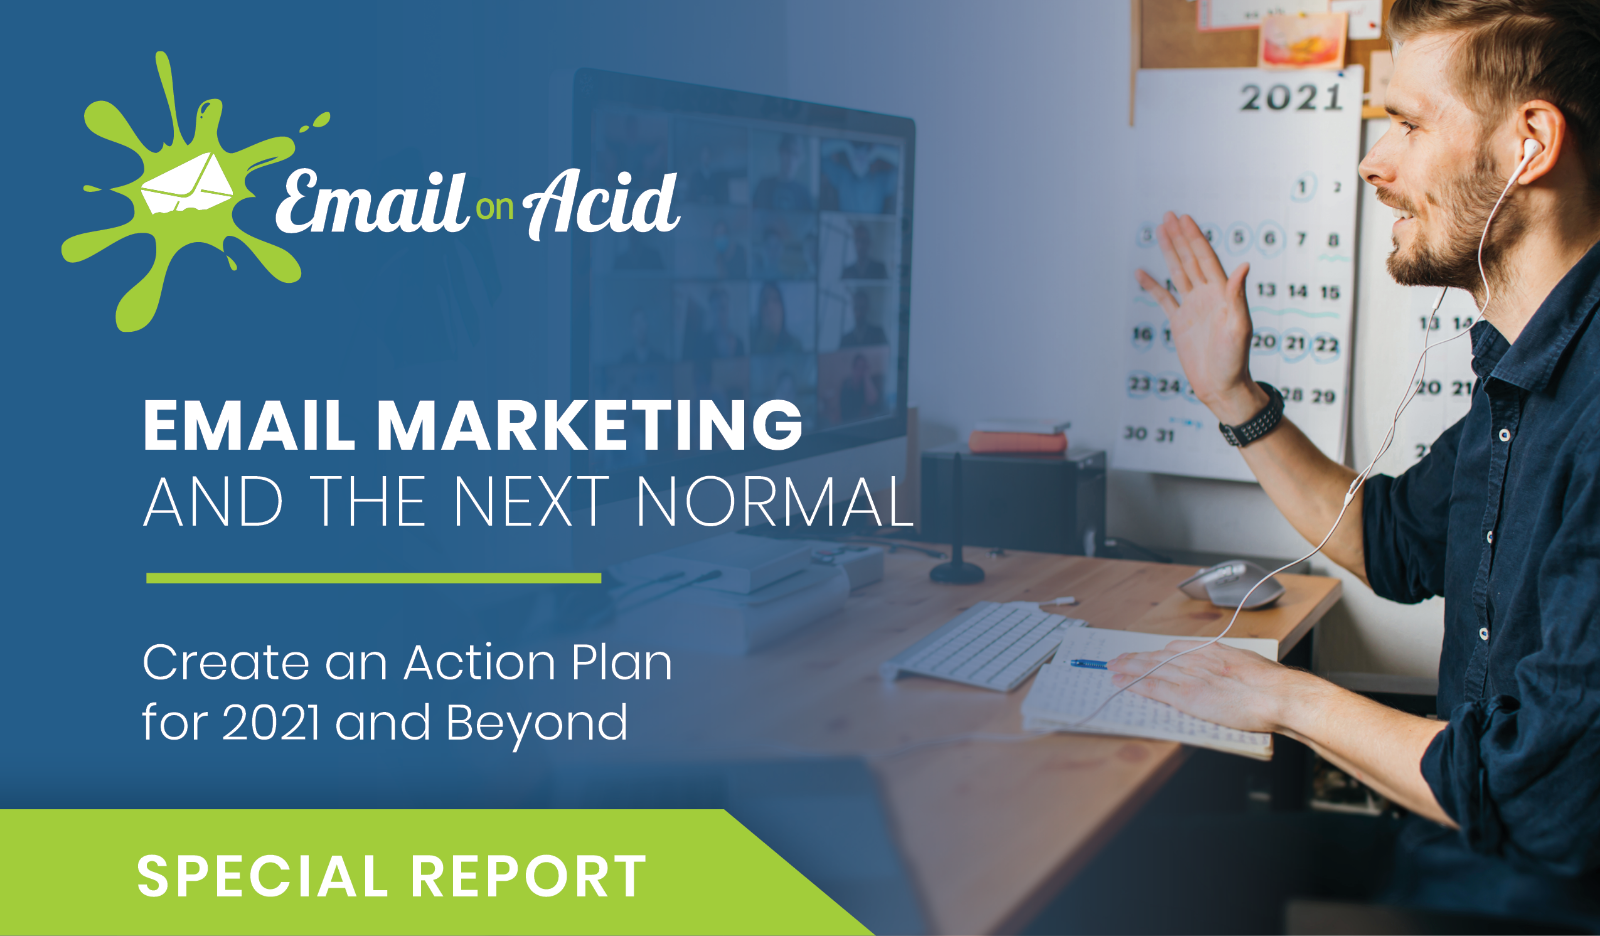 email marketer works on 2021 action plan